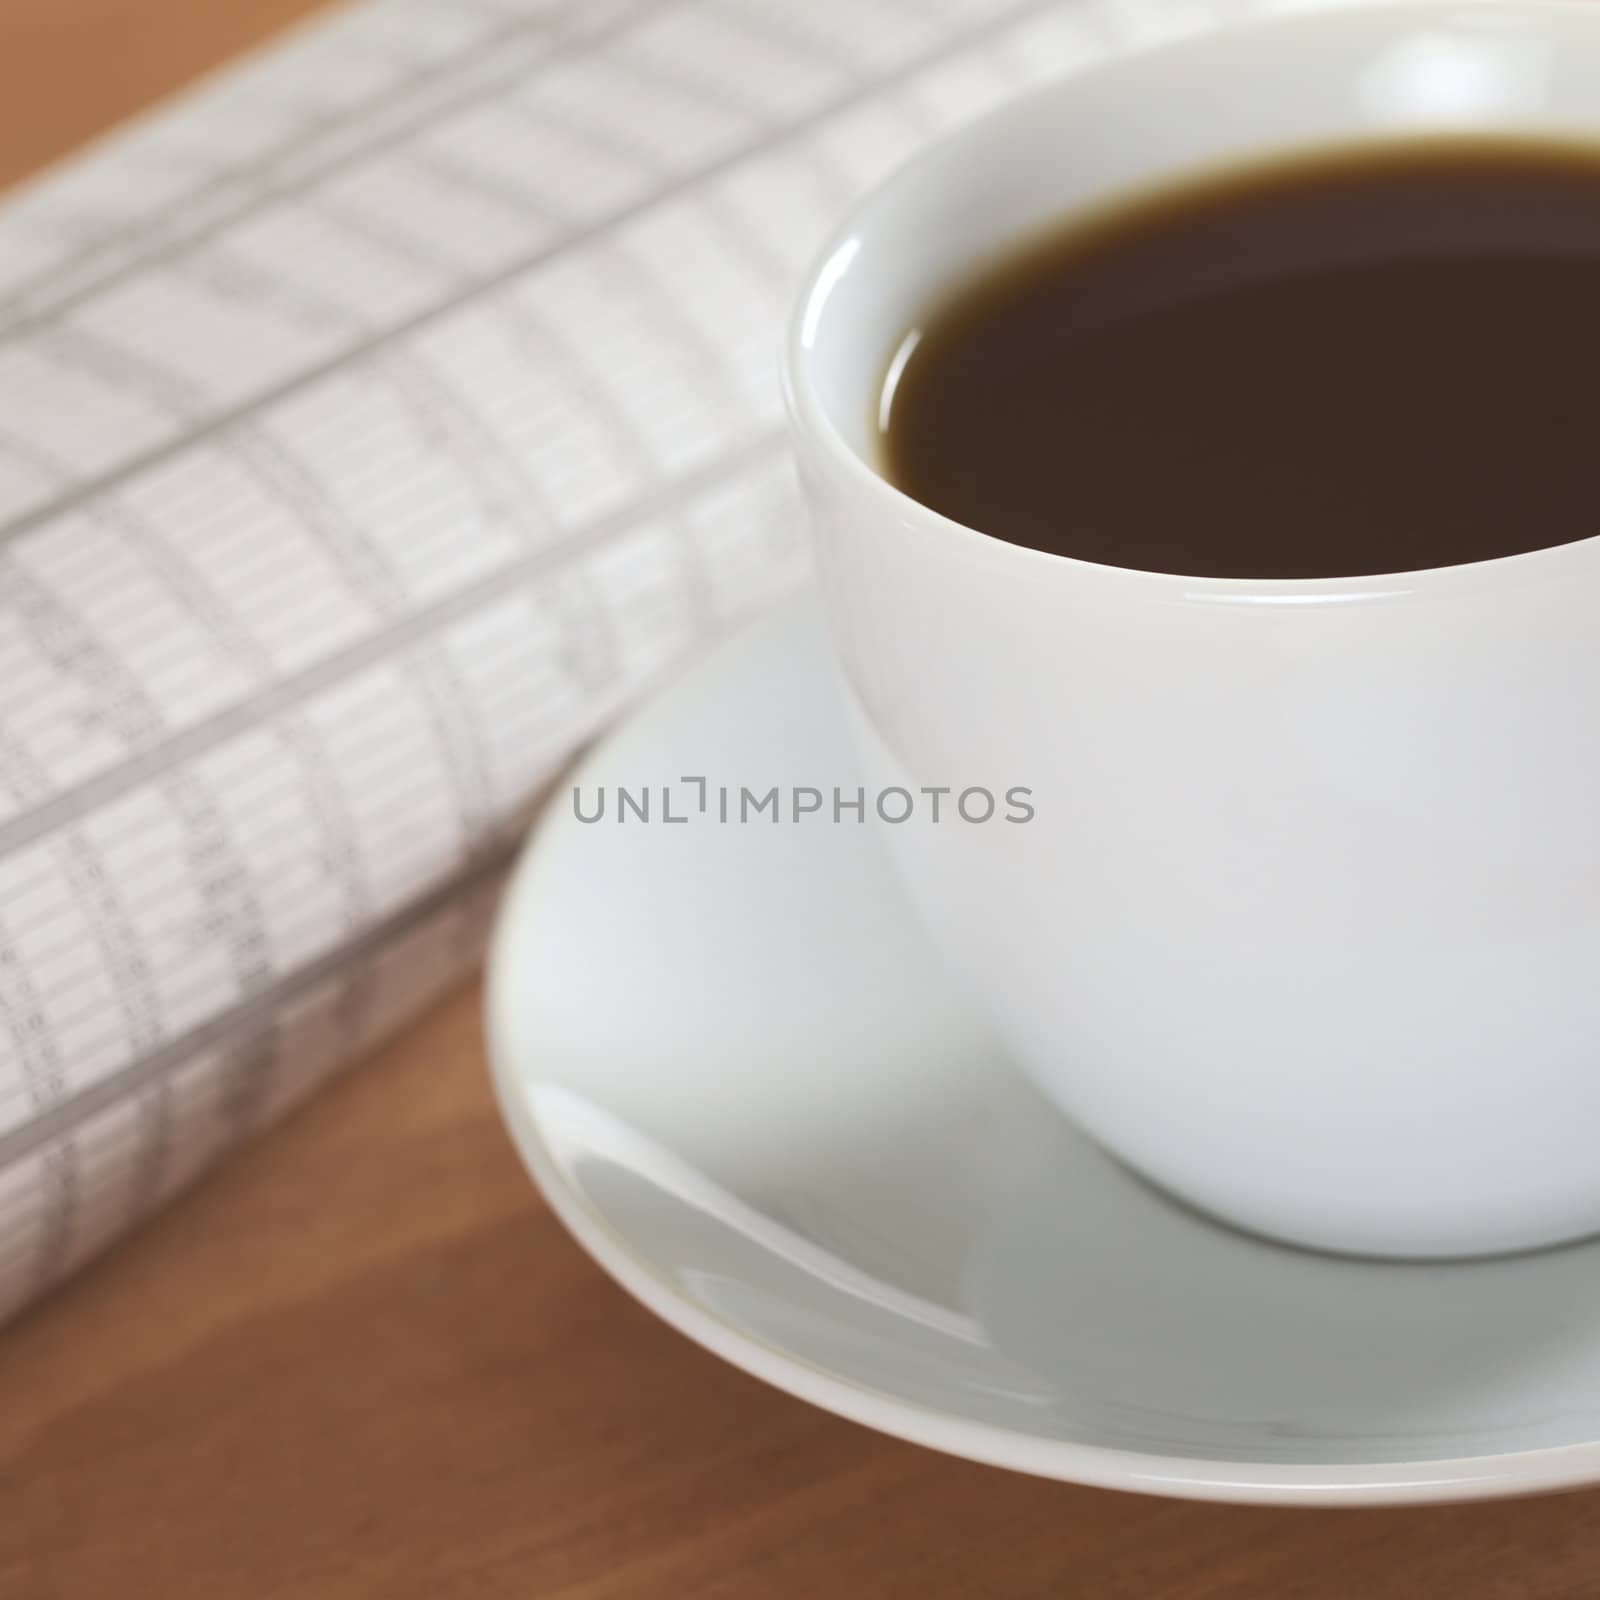 Simple hot coffee with newspaper concept (Selective Focus, Focus on the front rim of the coffee cup)